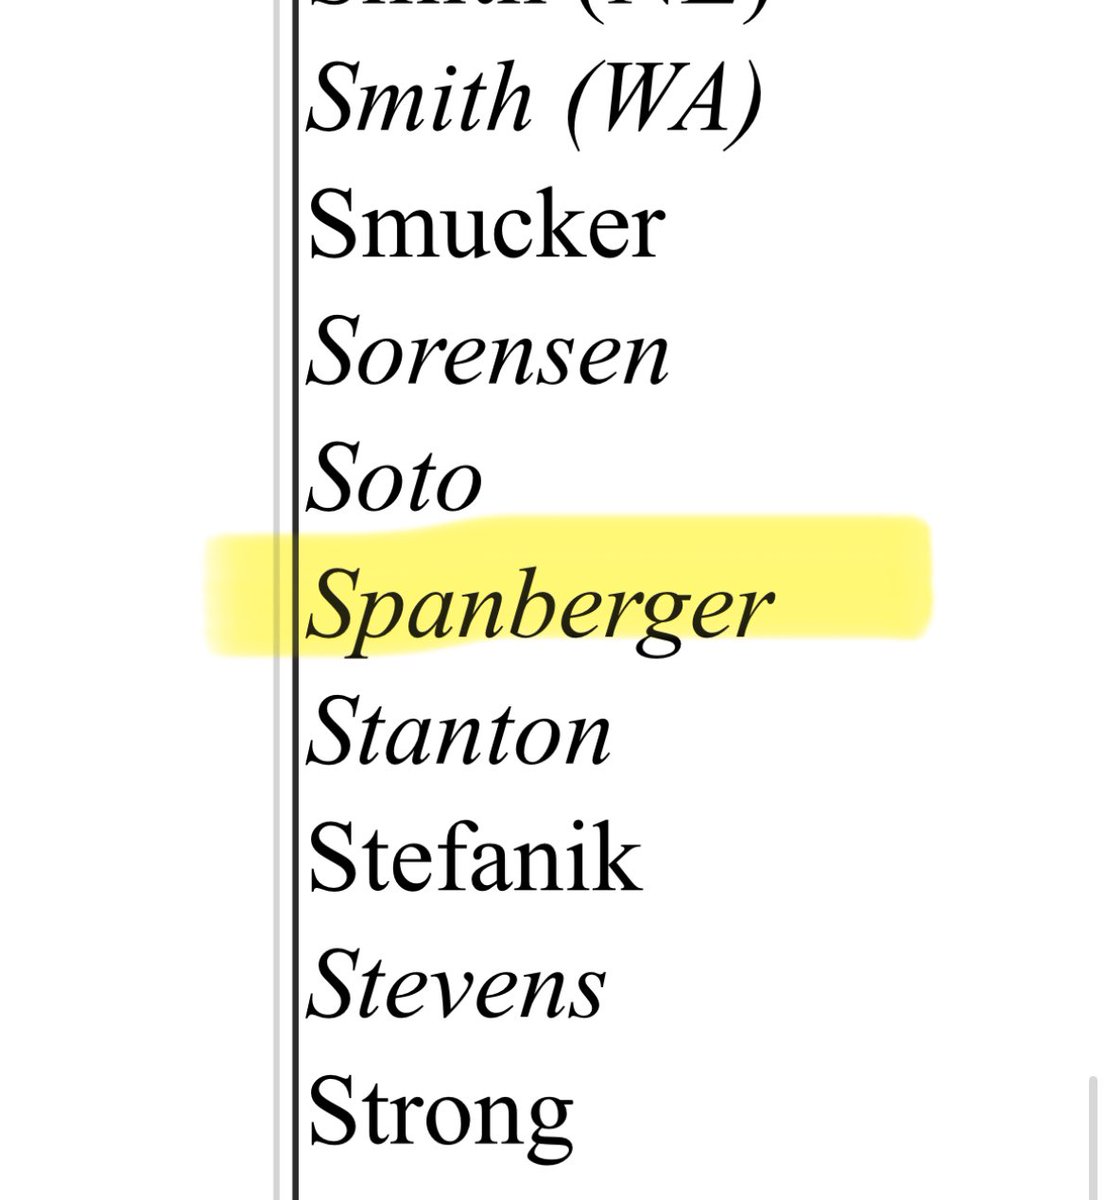 if levar stoney had guts he would attack spanberger for single-handedly continuing warrantless spying on americans